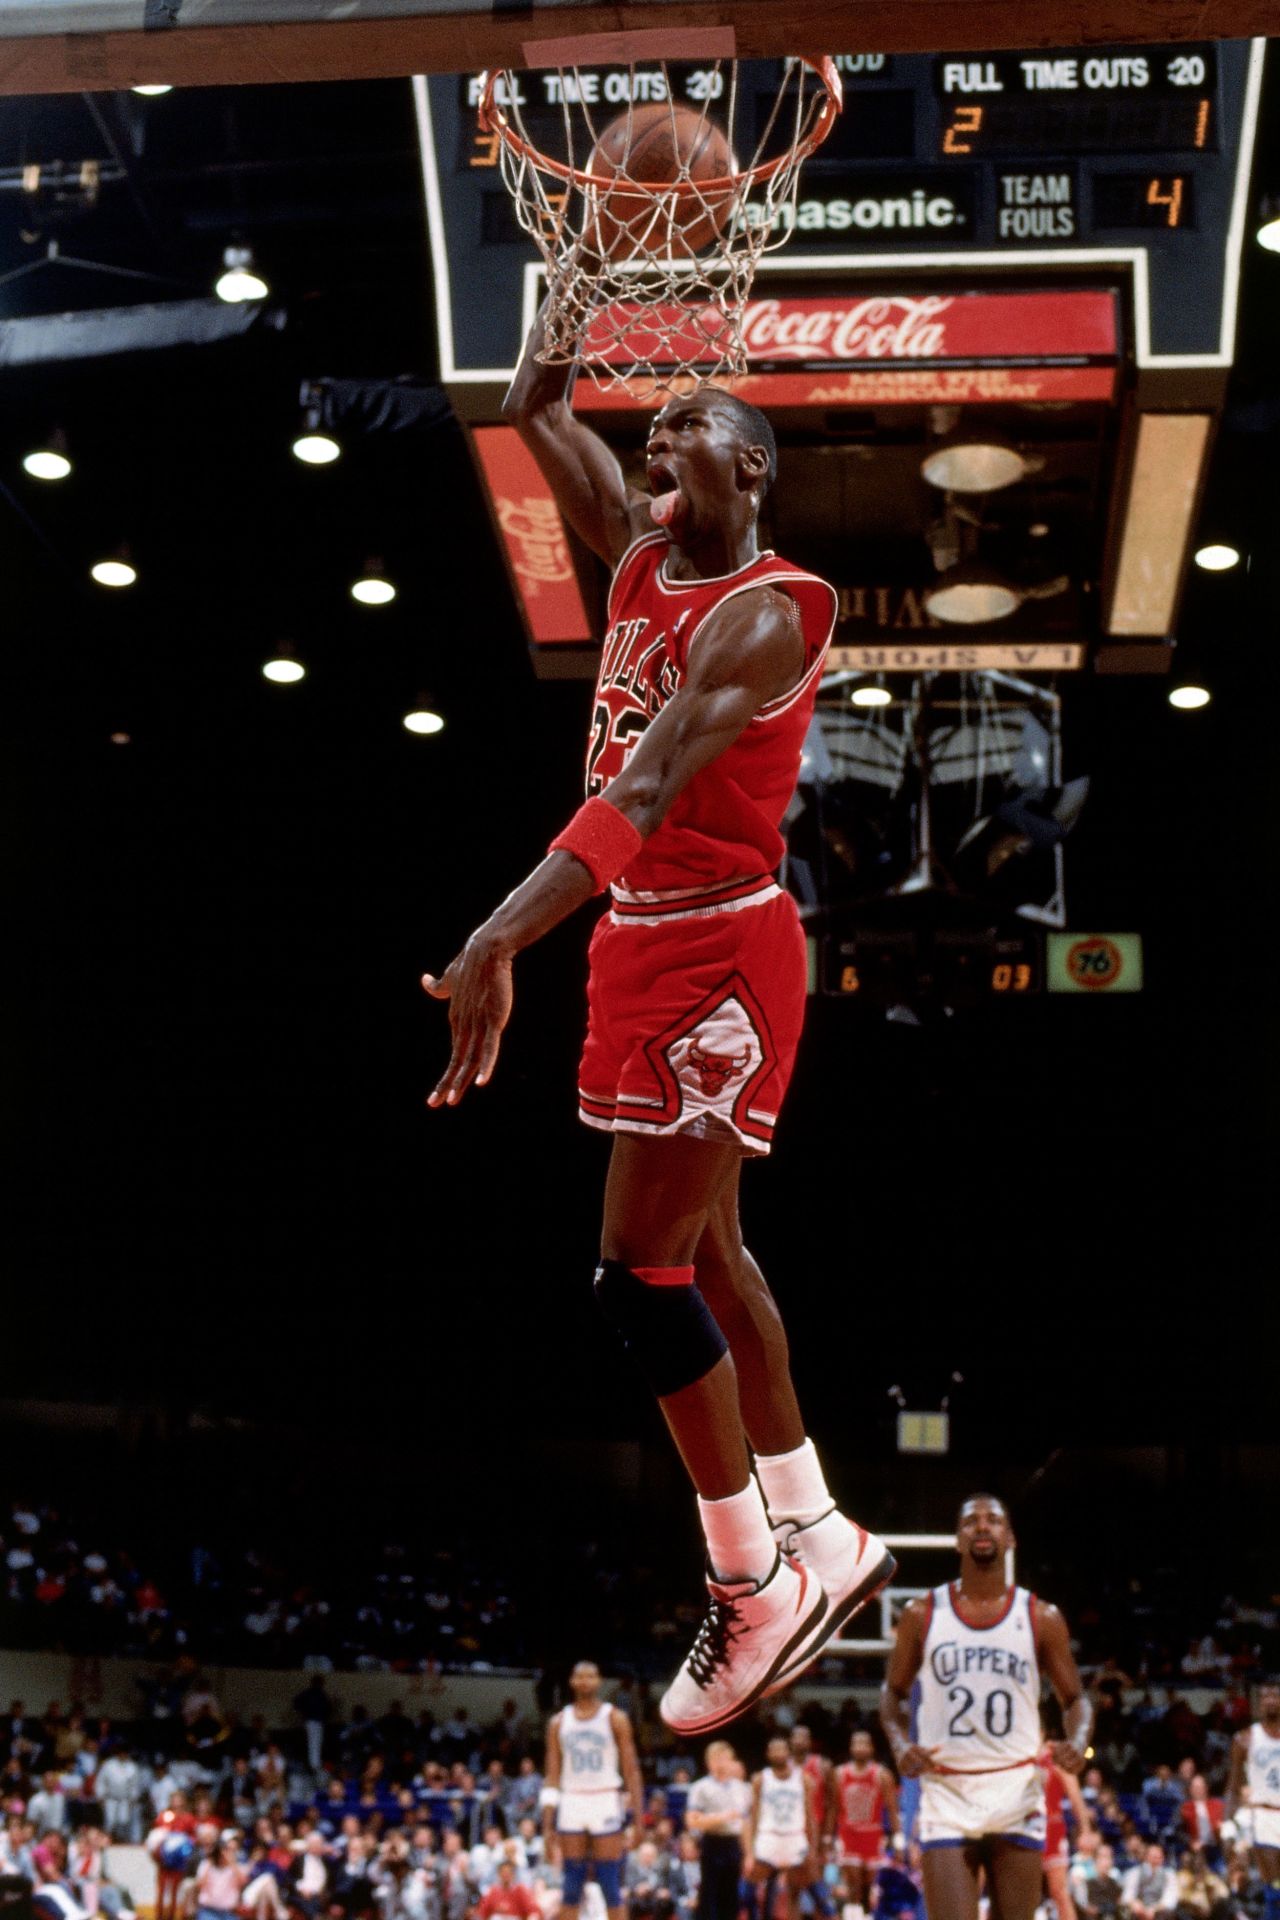 Jordan throws down a slam in 1987. That year he won the first of his 10 scoring titles, averaging a career-high 37.1 points per game.